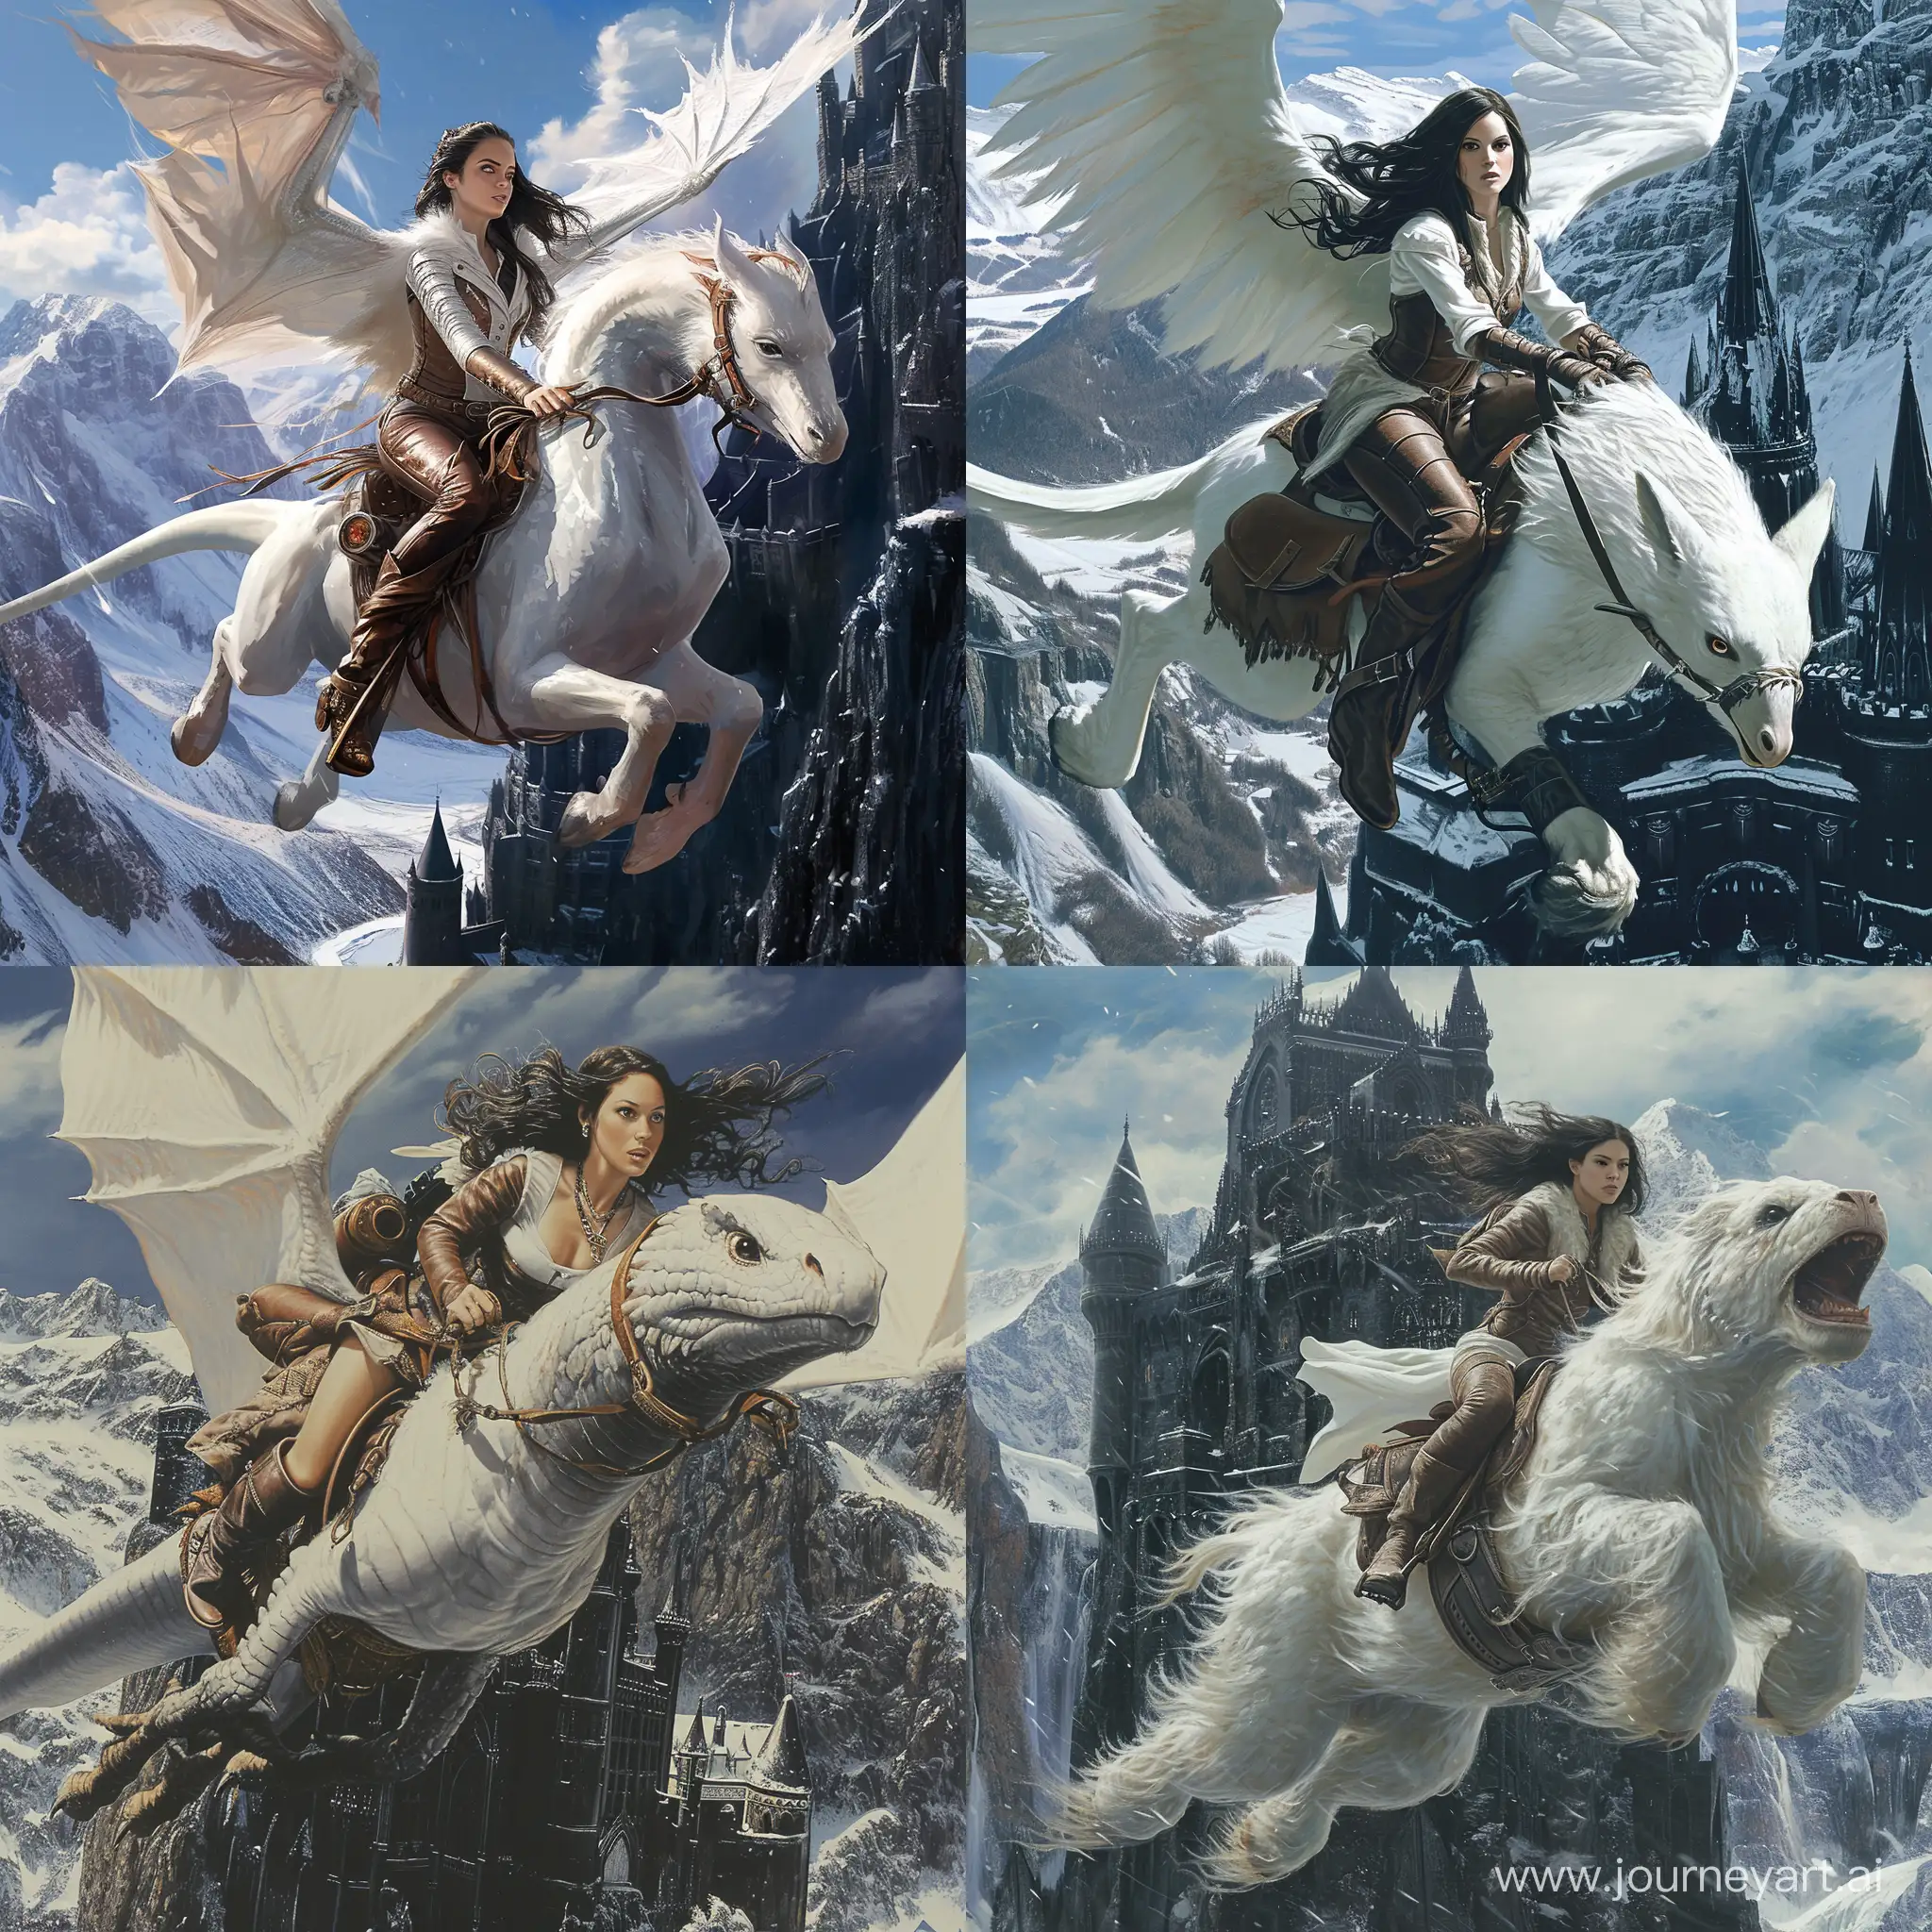 White young woman, lether clothes, dark hair,  riding a very very very very very very big.  Flying over a black castle
Big snowy mountains in the background